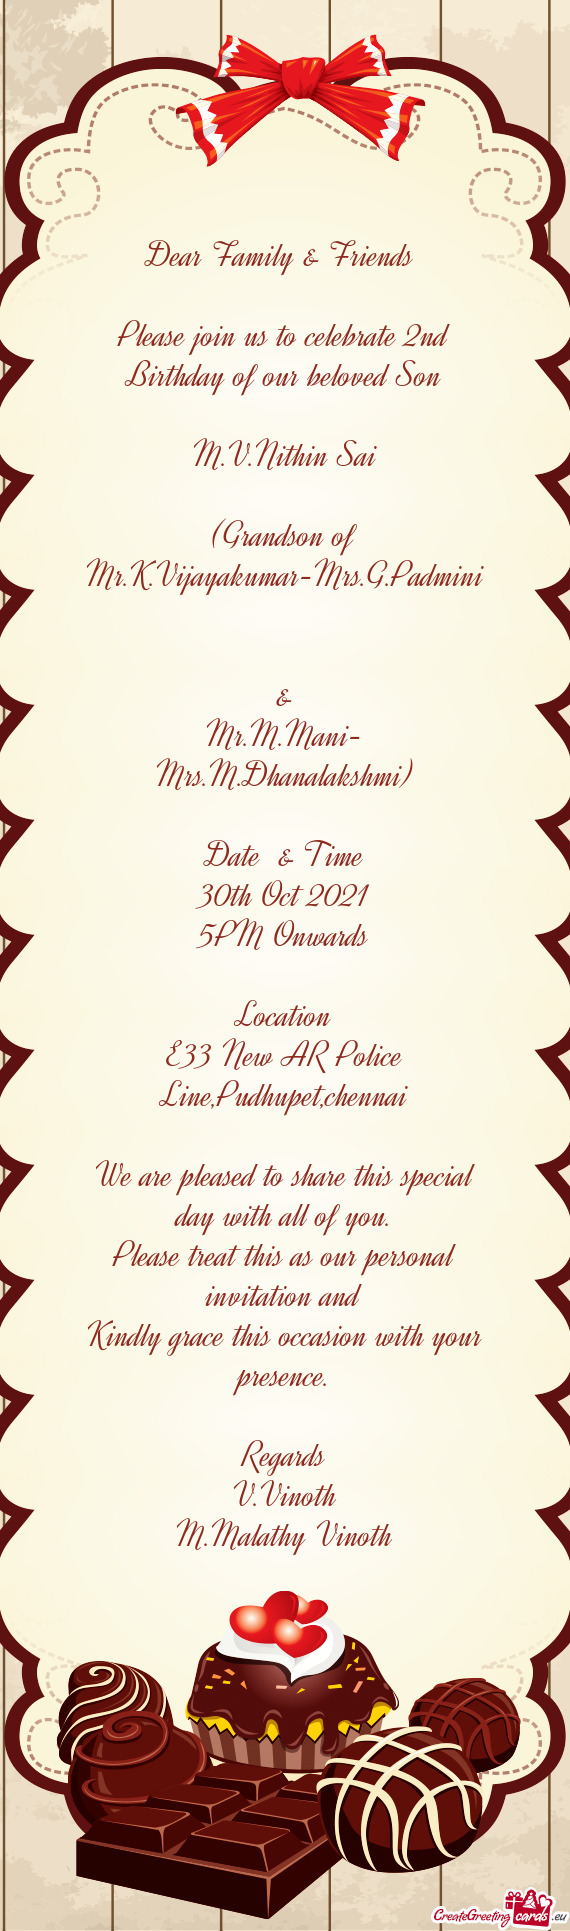 Chennai
 
 We are pleased to share this special day with all of you